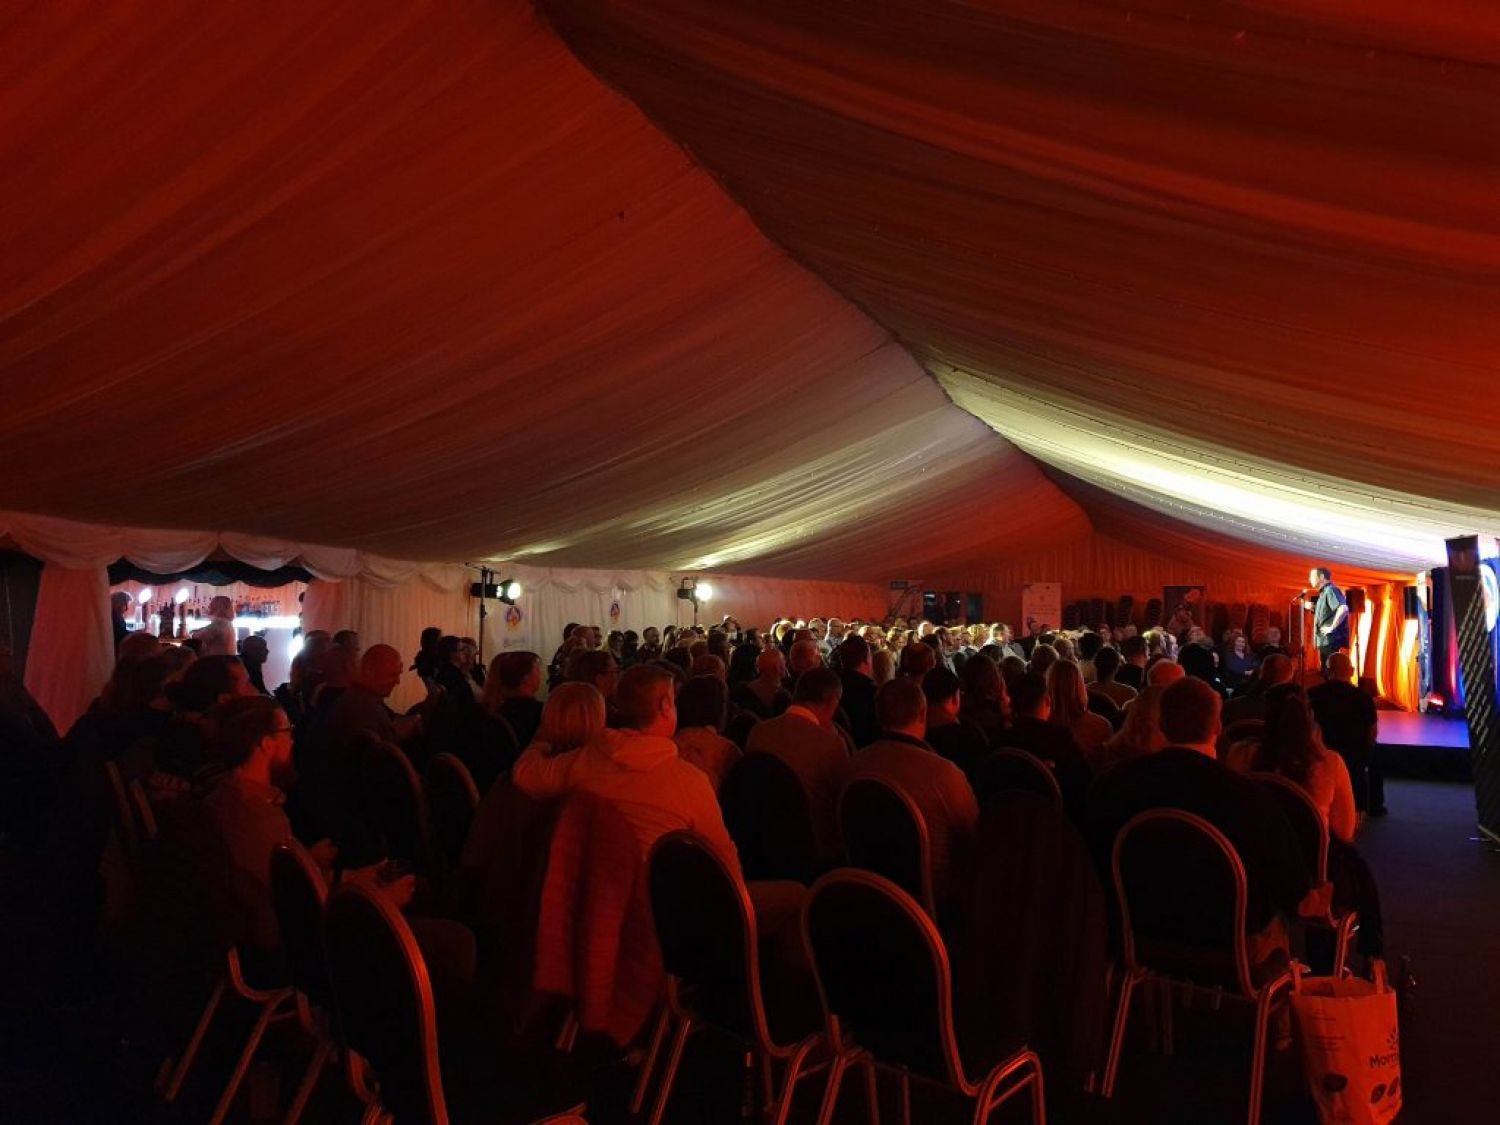 The Southport Comedy Festival Under Canvas